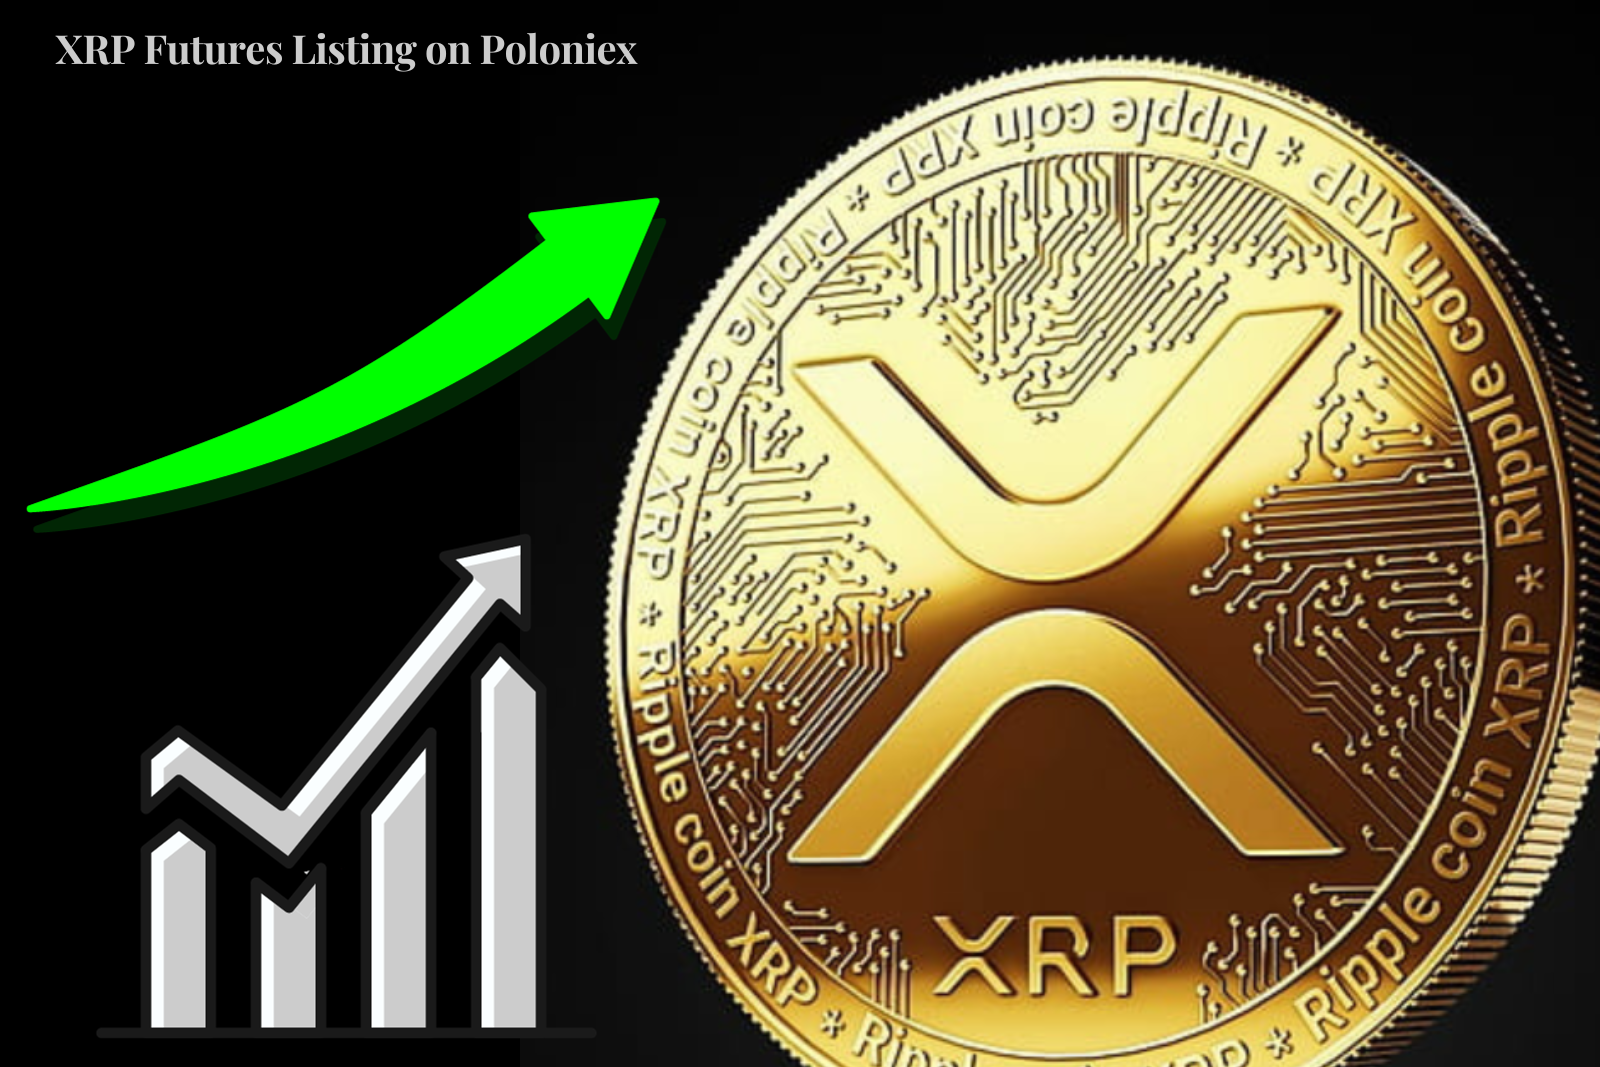 XRP Futures Listing on Polonie